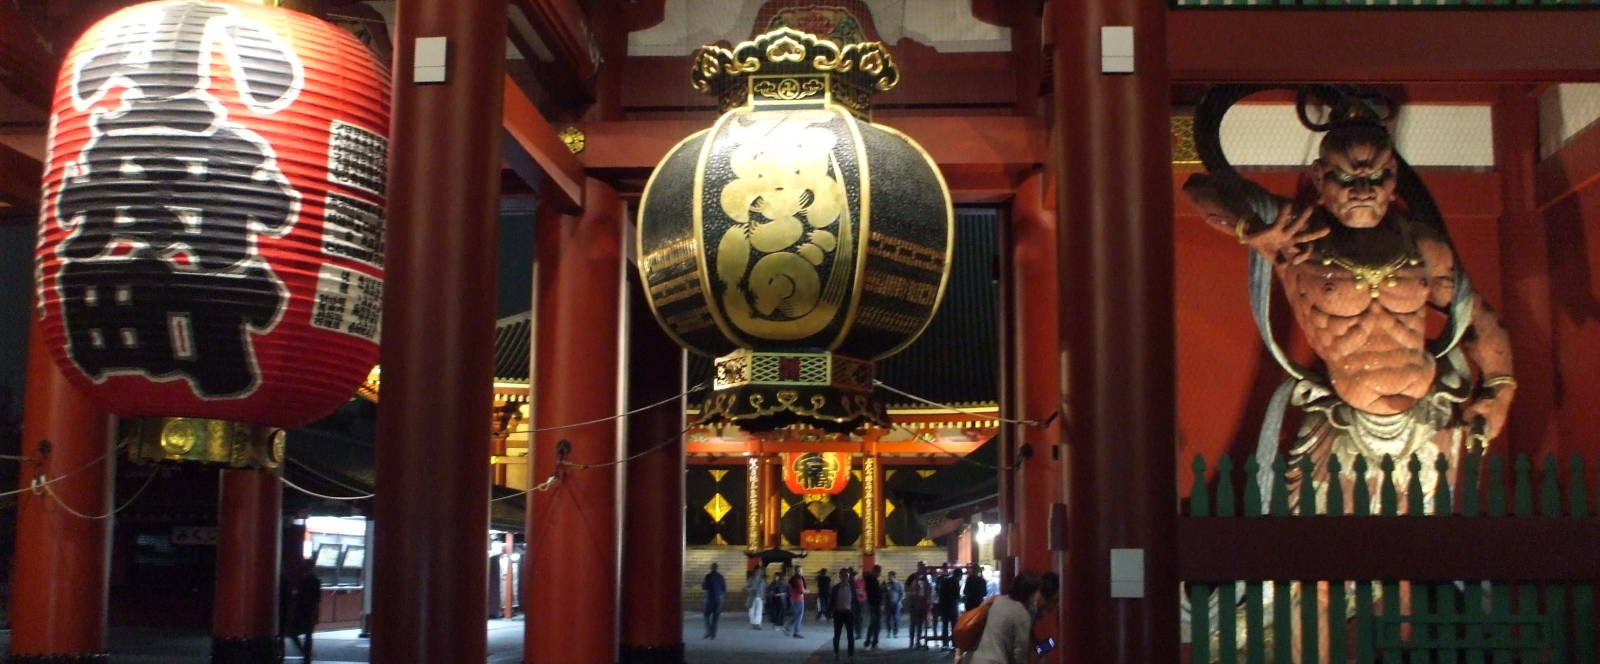 Entry gate at a temple in Japan.